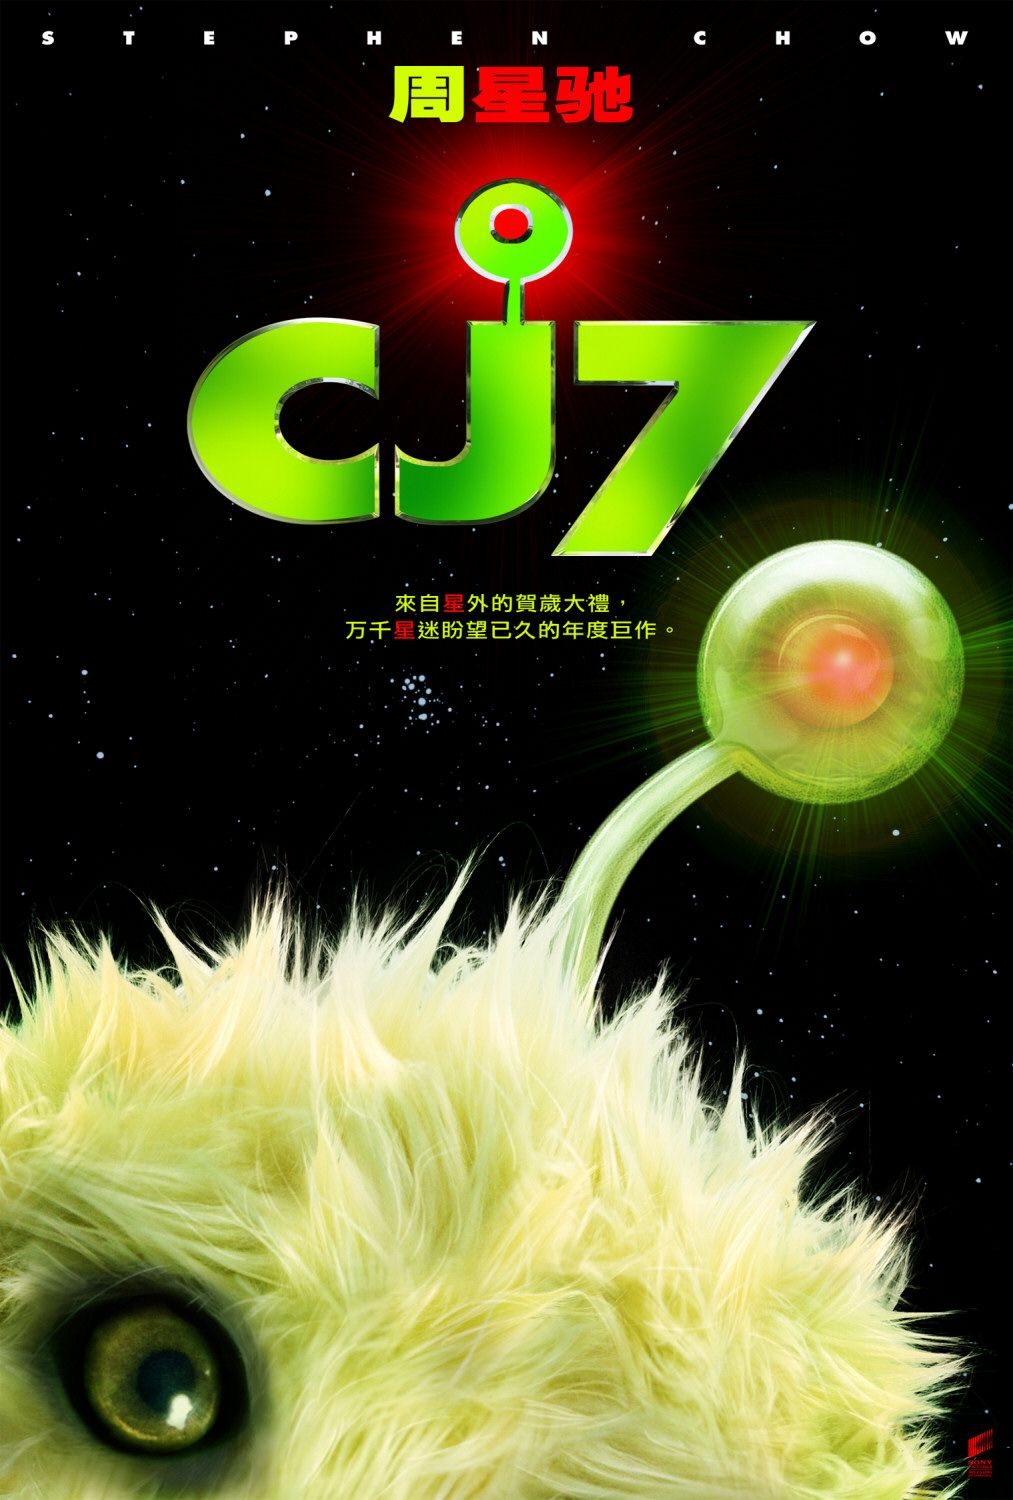 Extra Large Movie Poster Image for CJ7 (#2 of 2)